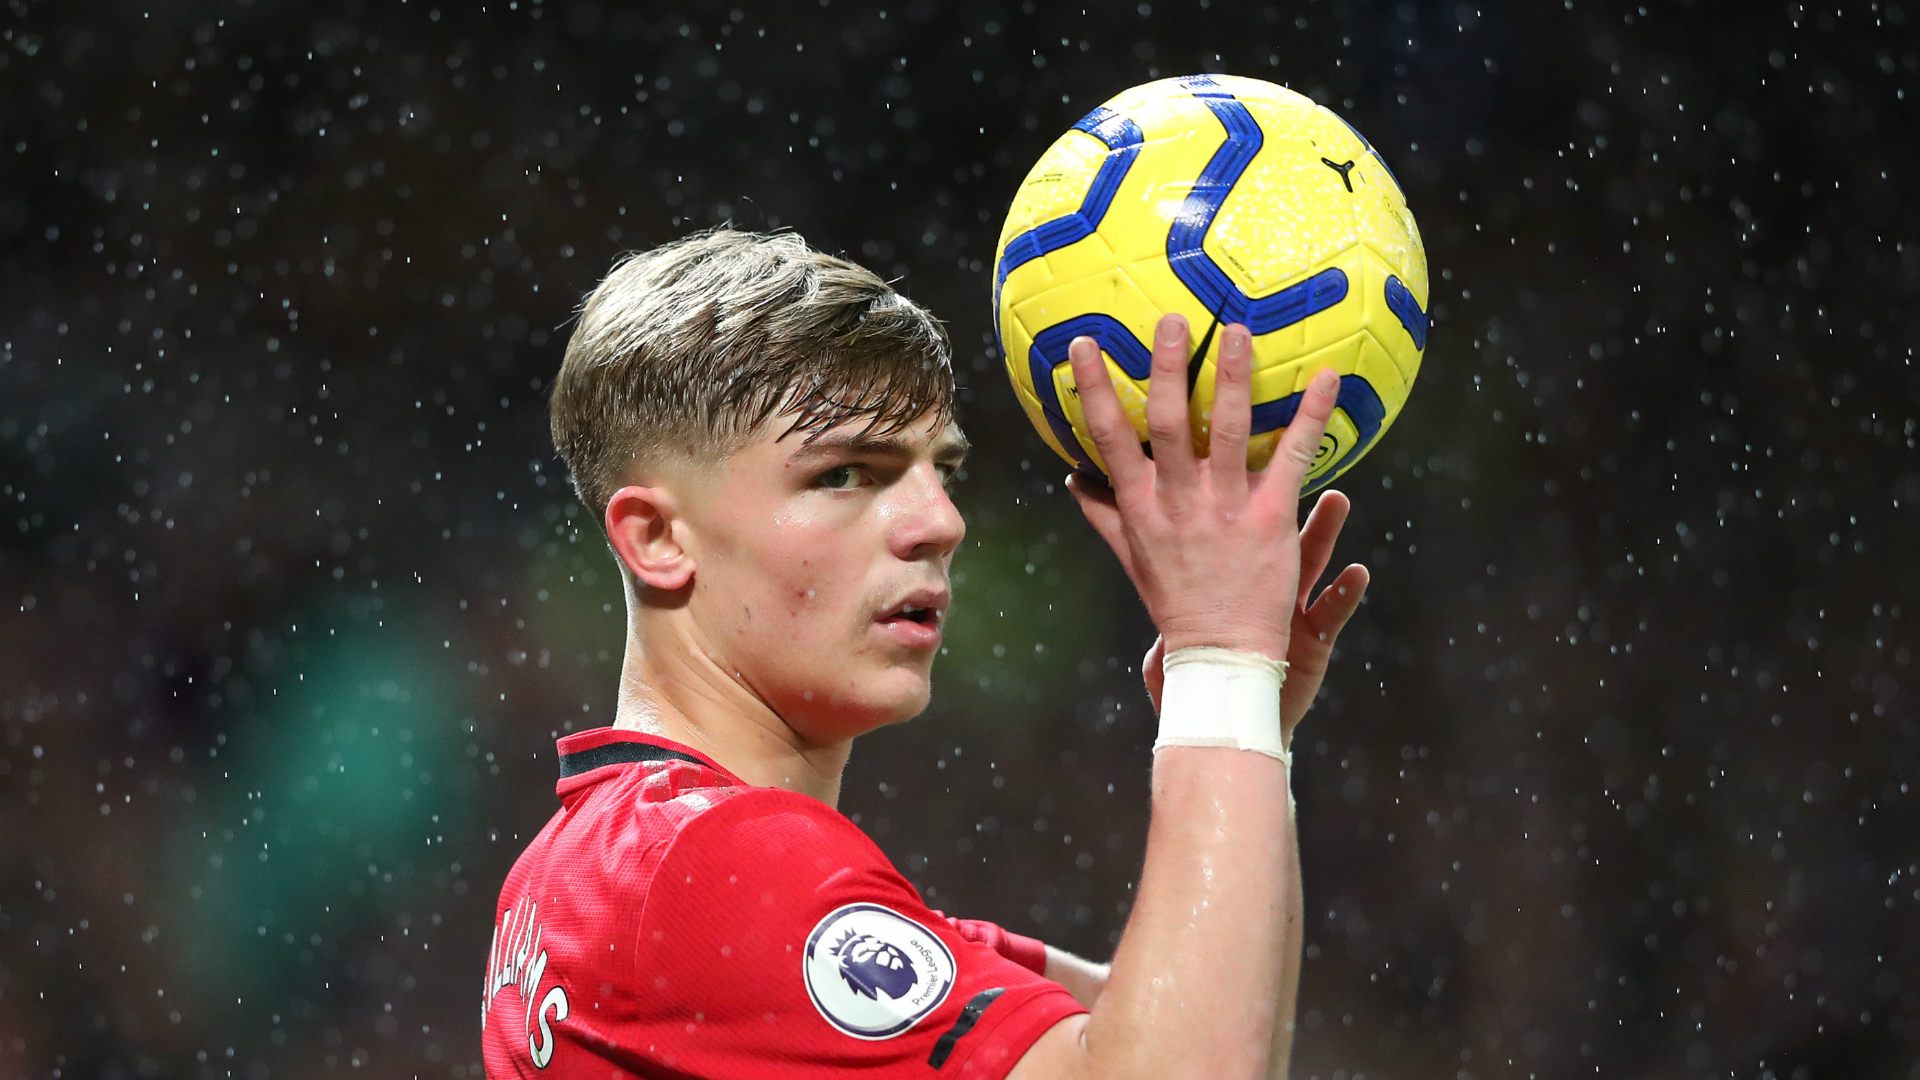 Manchester United have rewarded Brandon Williams with a long-term contract following an impressive breakthrough campaign.